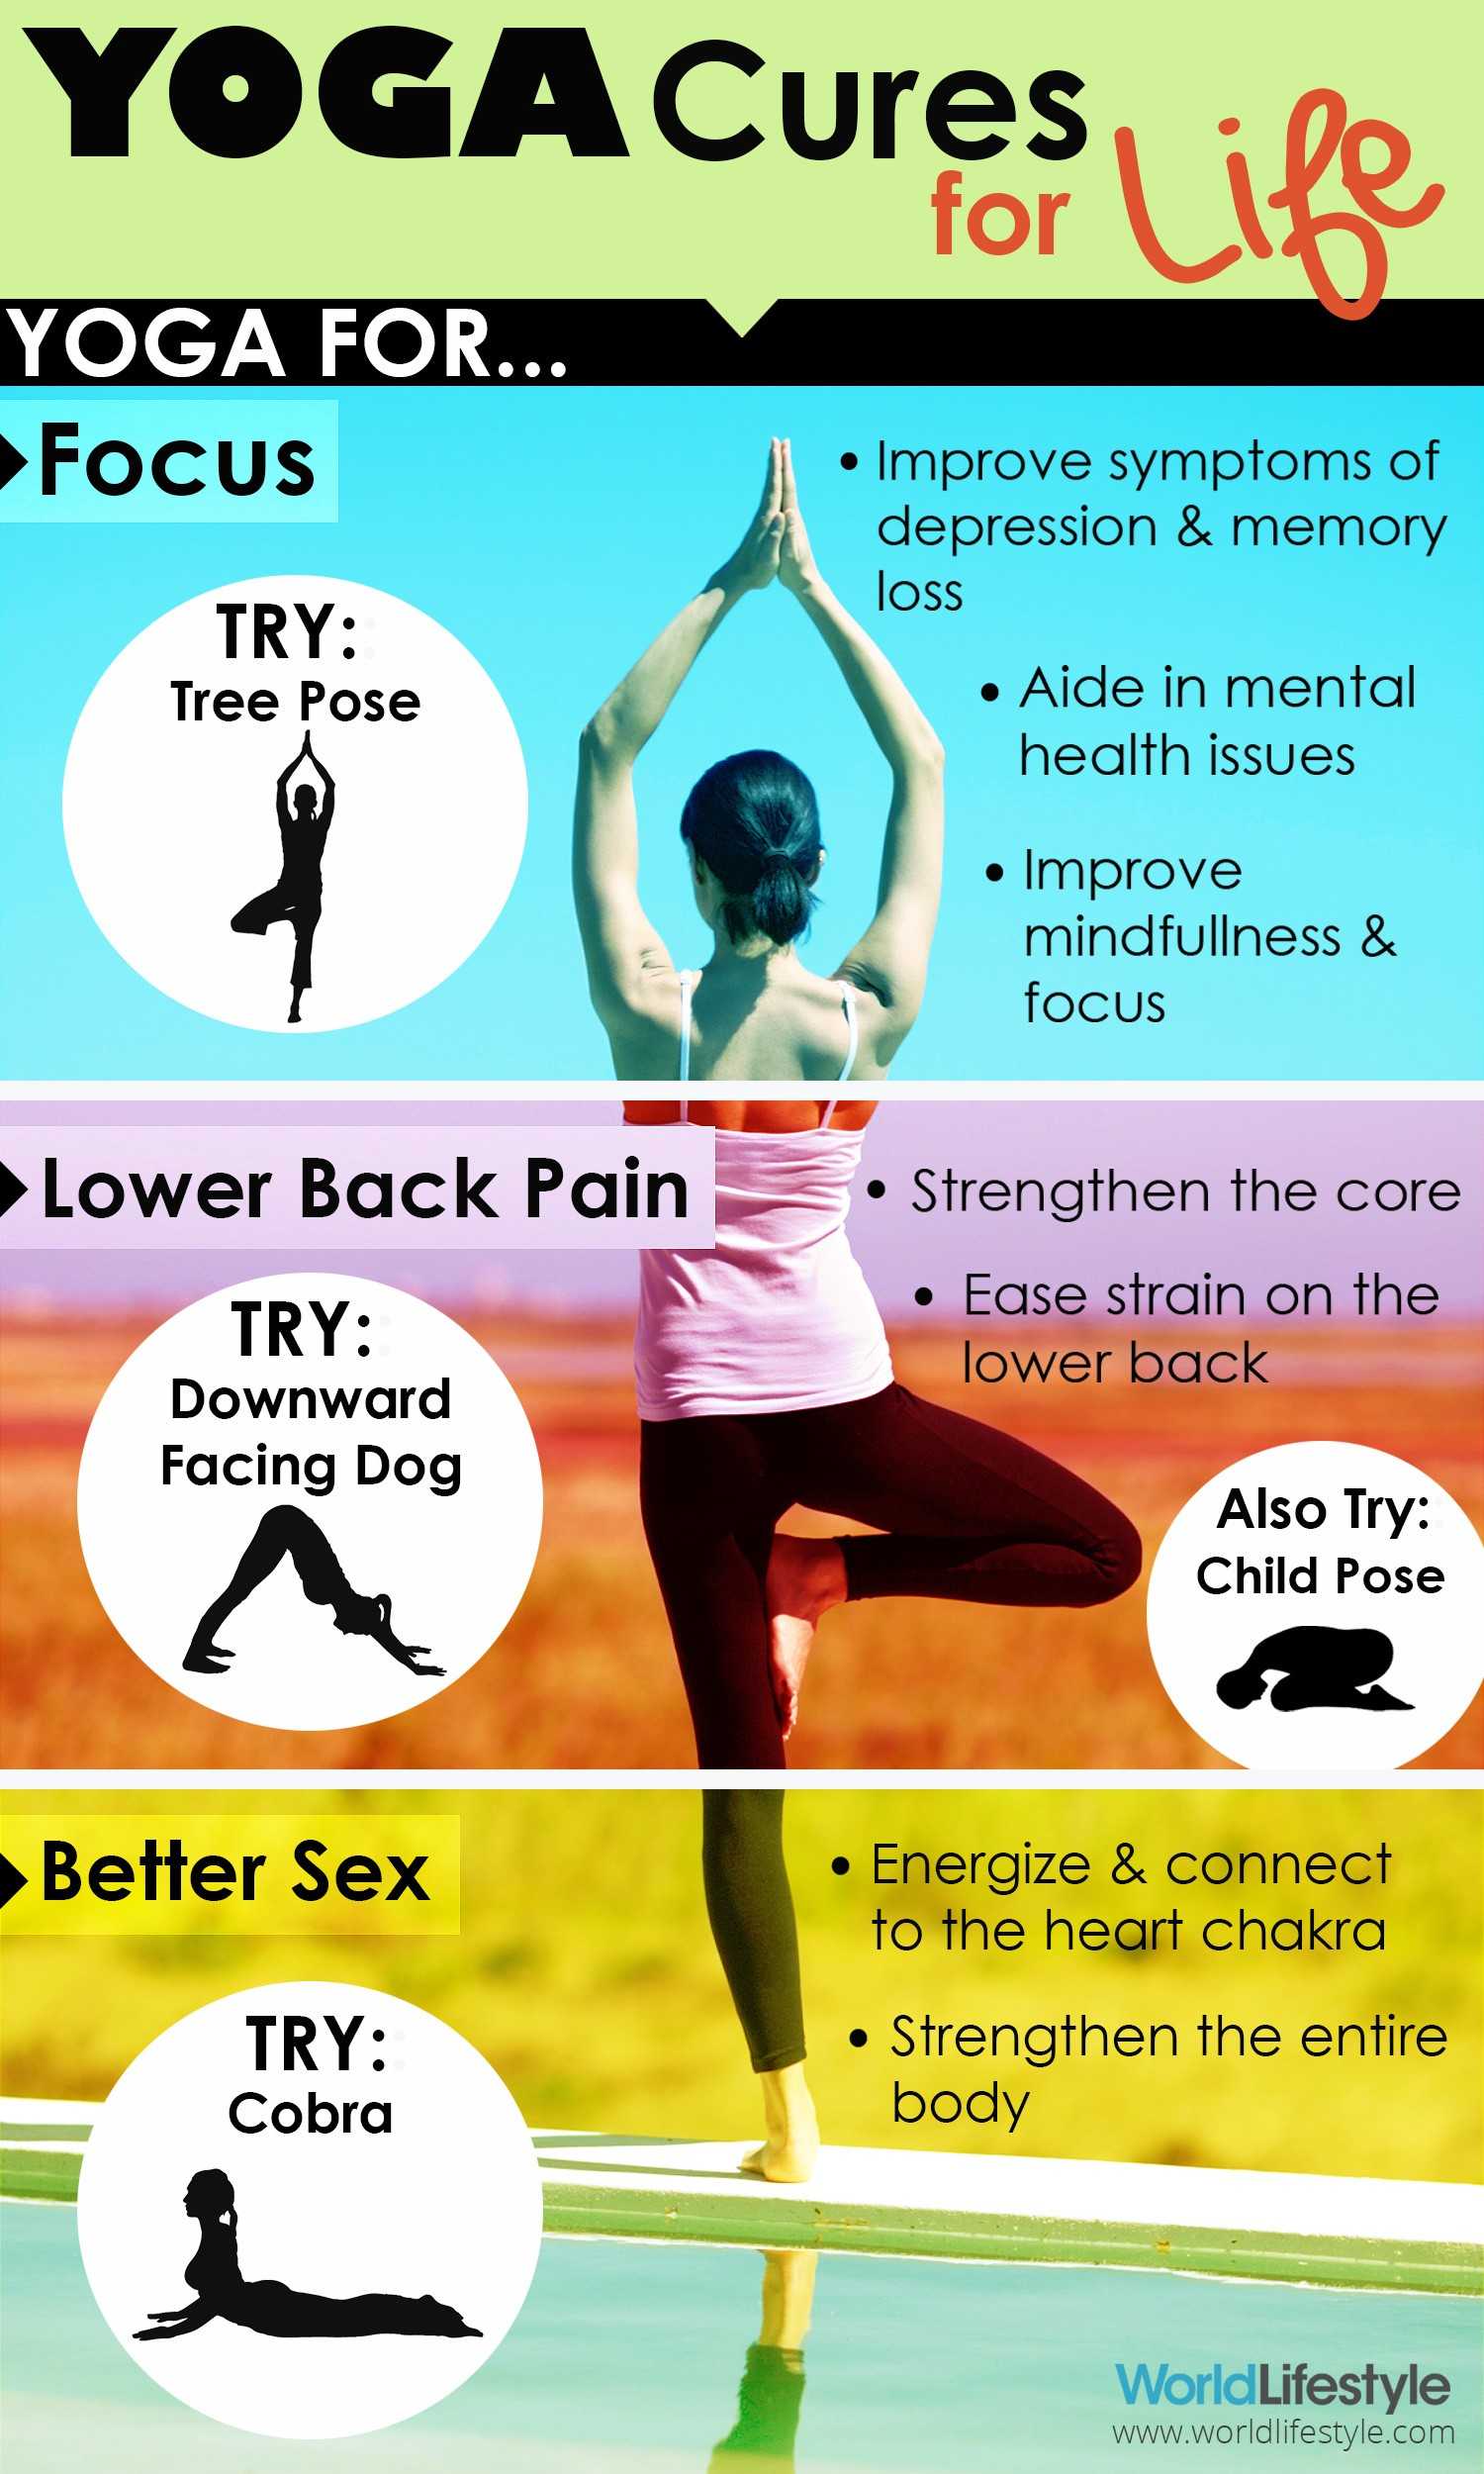 Yoga Cures For Life